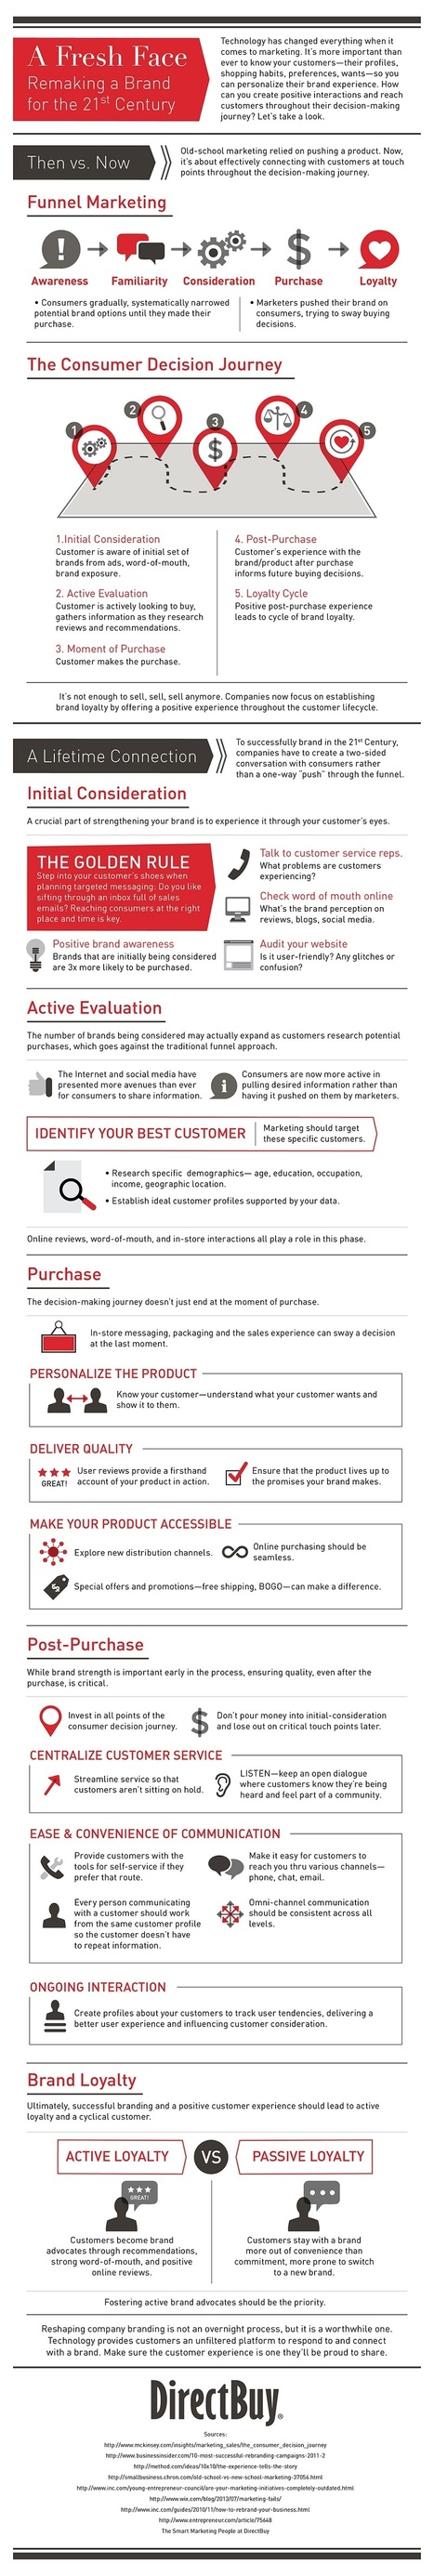 How to Reinvent Your Marketing for This Century - Infographic | Customer Engagement | Scoop.it